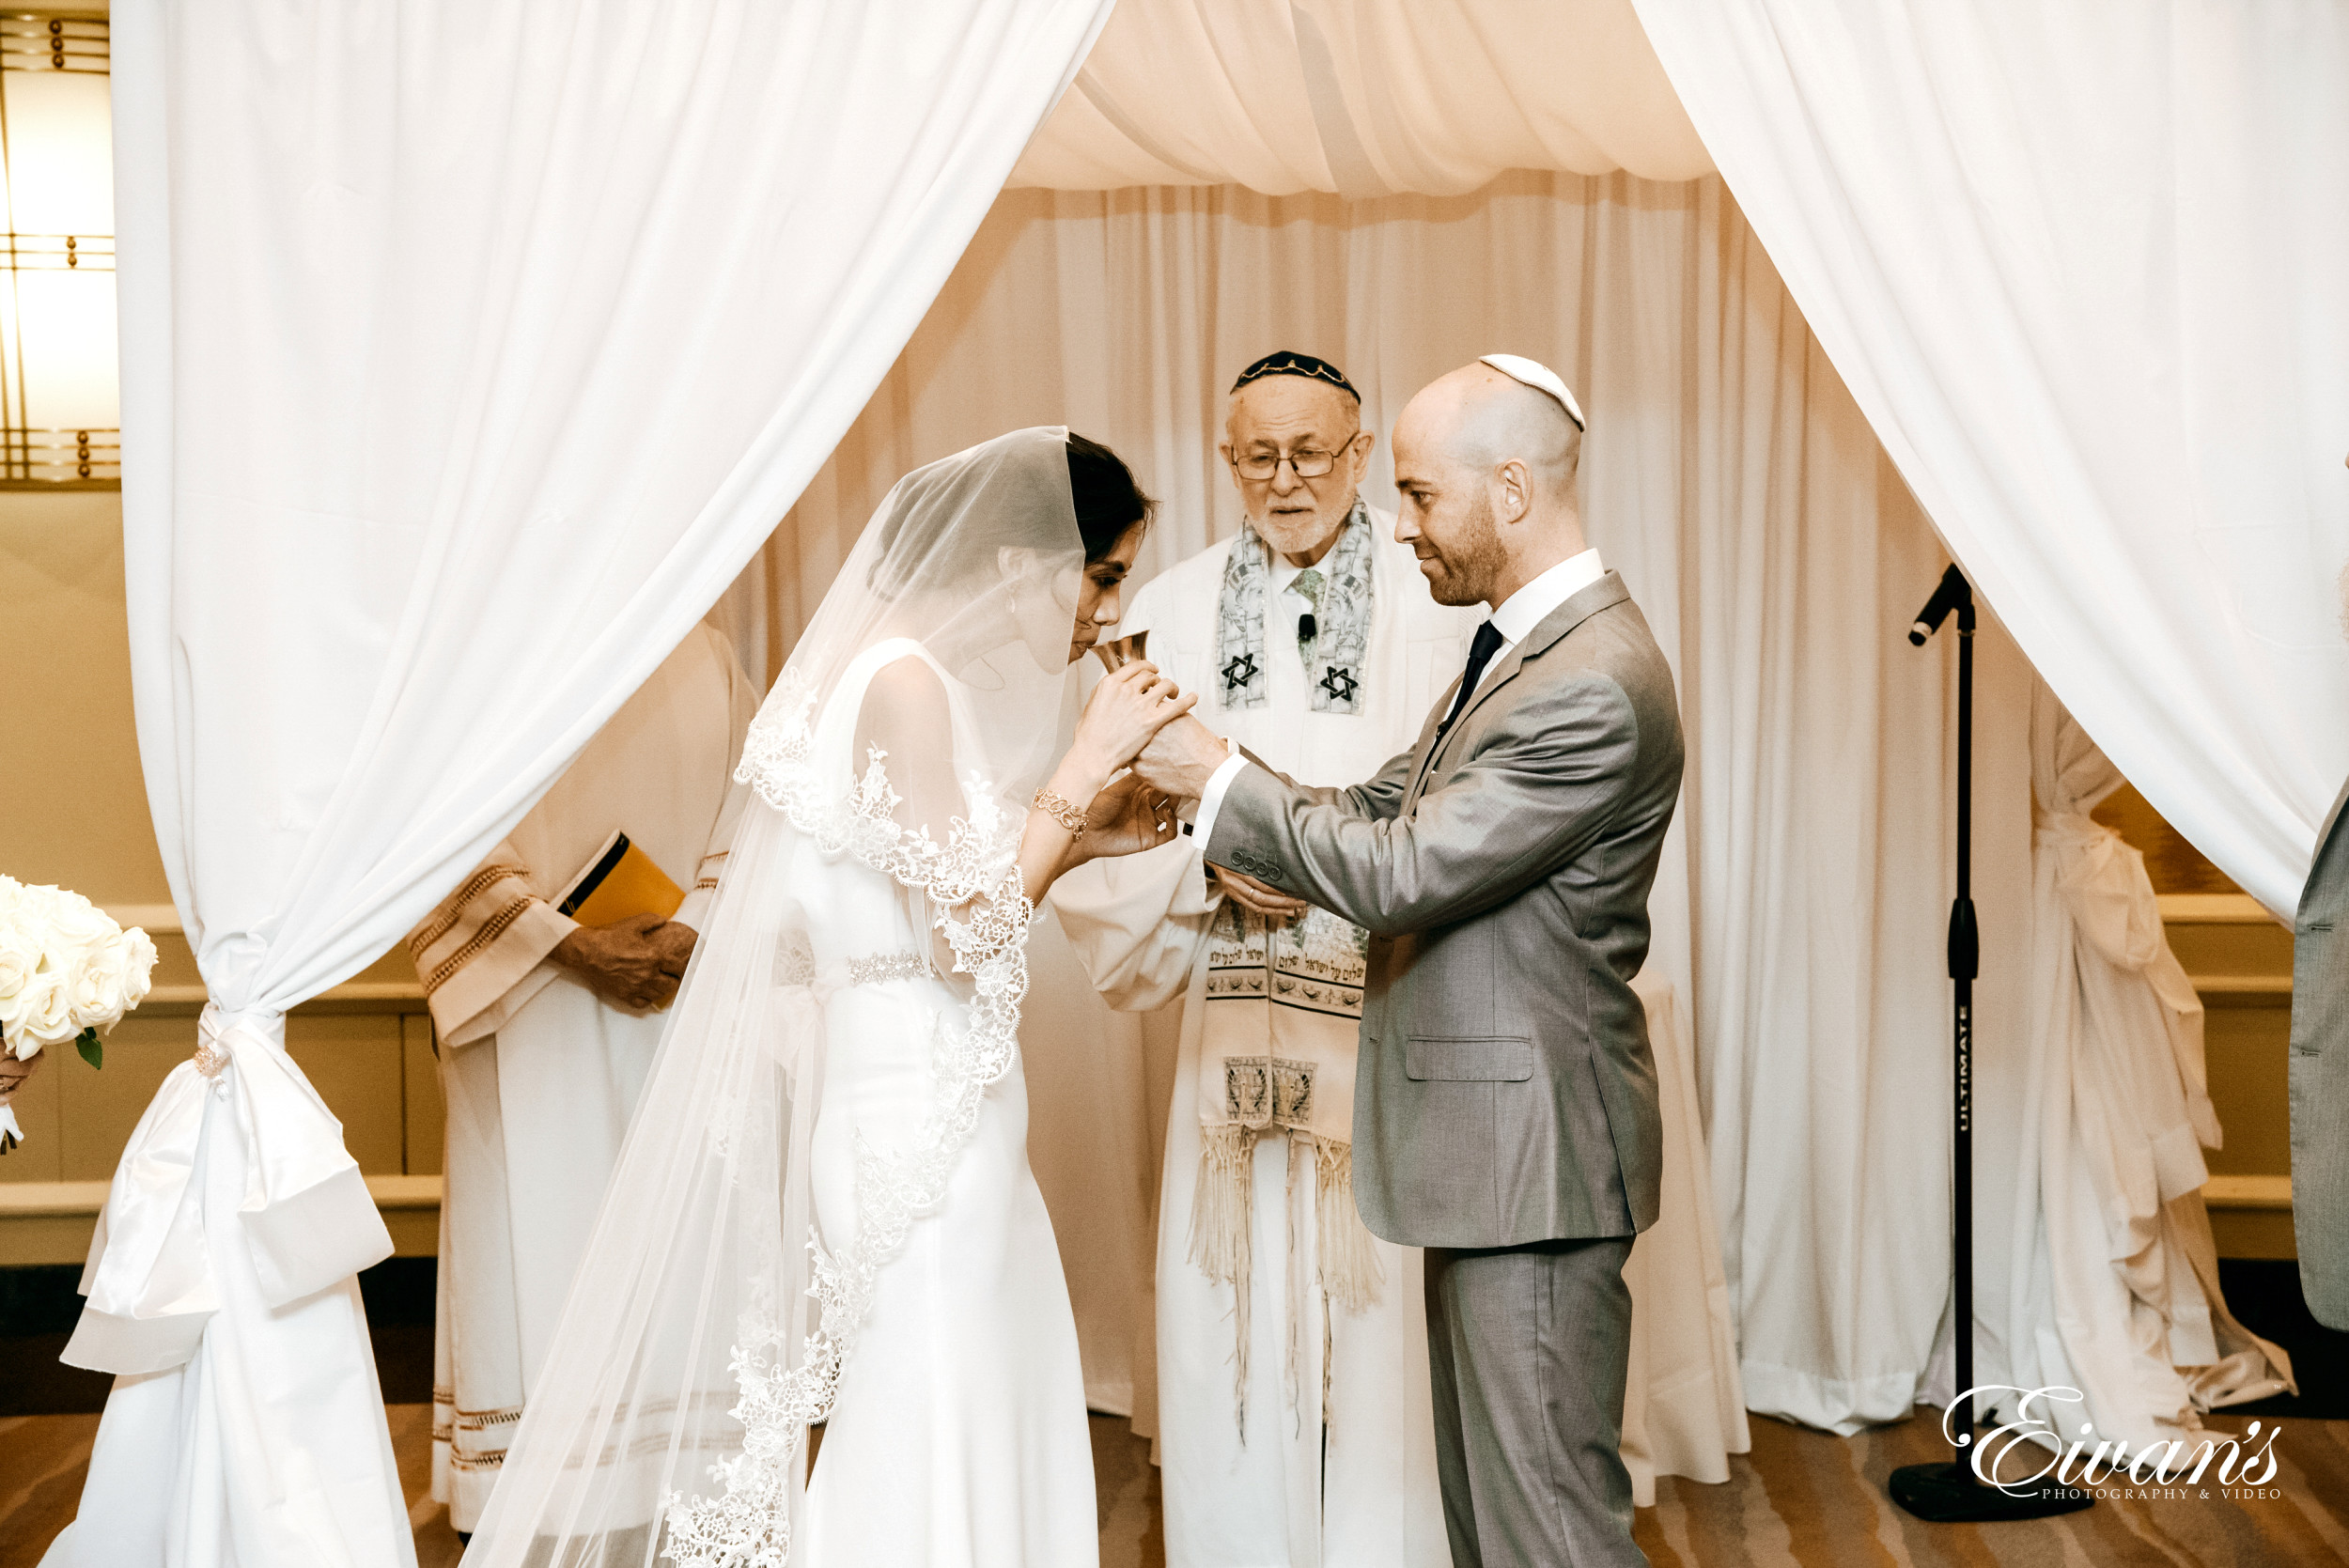 An Overview of the Traditional Jewish Wedding Ceremony